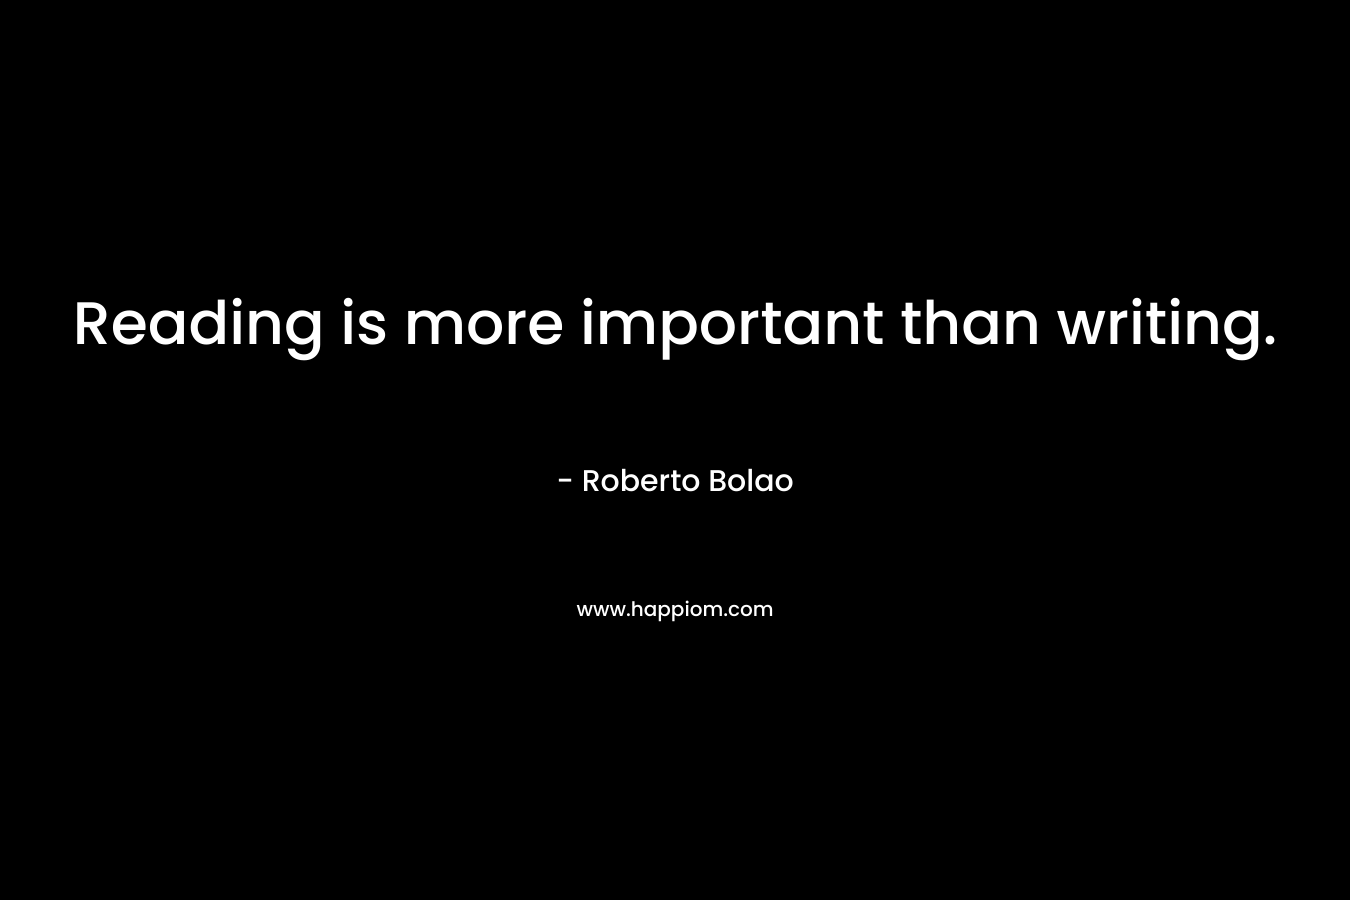 Reading is more important than writing.